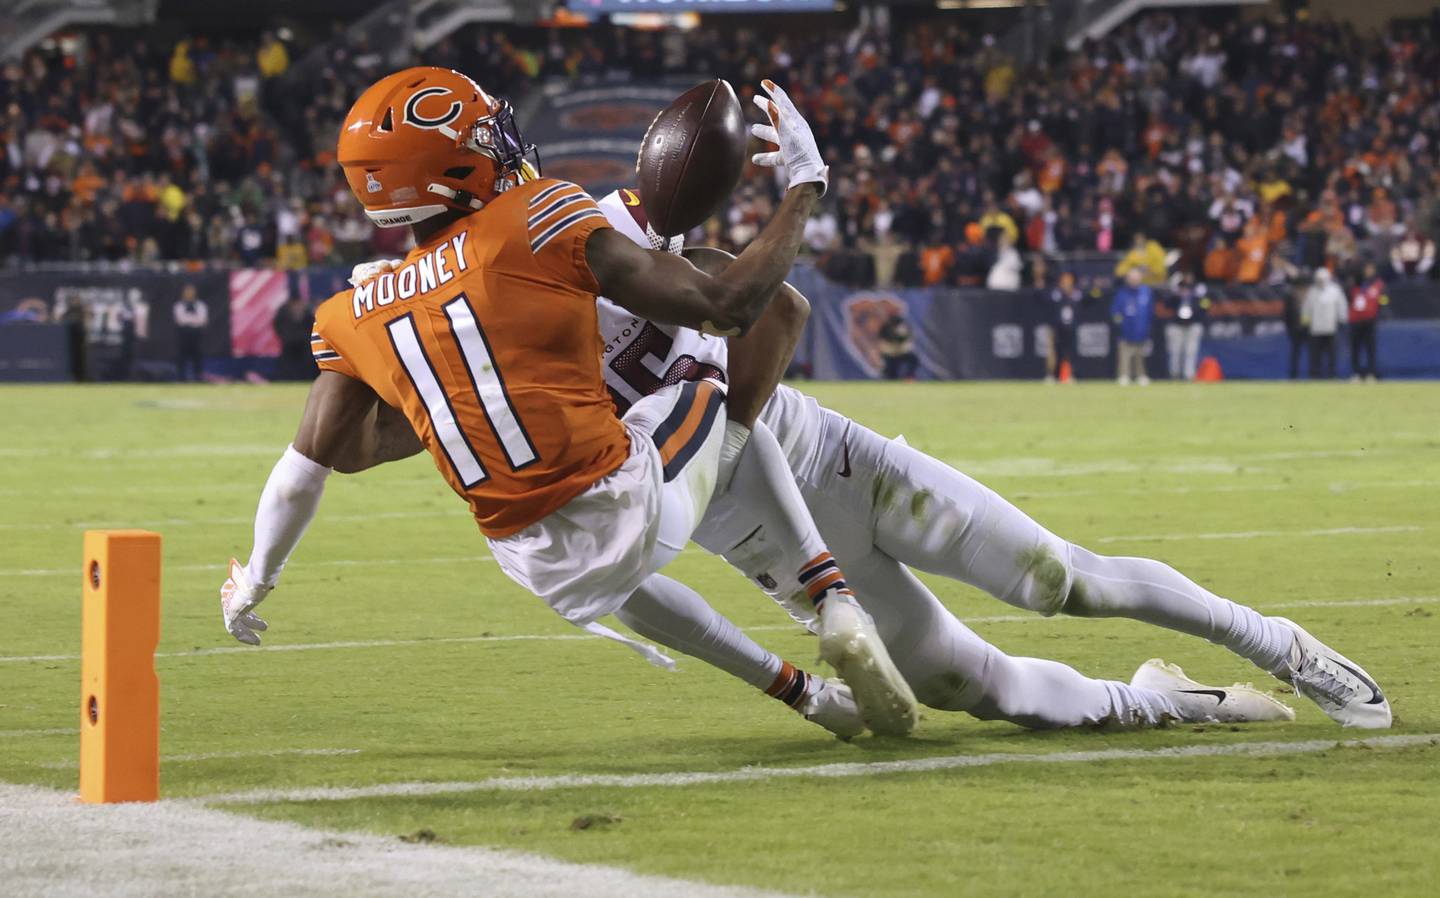 Bears wide receiver Darnell Mooney (11) reaches for the ball as Commanders cornerback Benjamin St-Juste defends at the goal line in the final seconds of the game Thursday at Soldier Field. Mooney was called short of the end zone, and the Bears lost 12-7. 